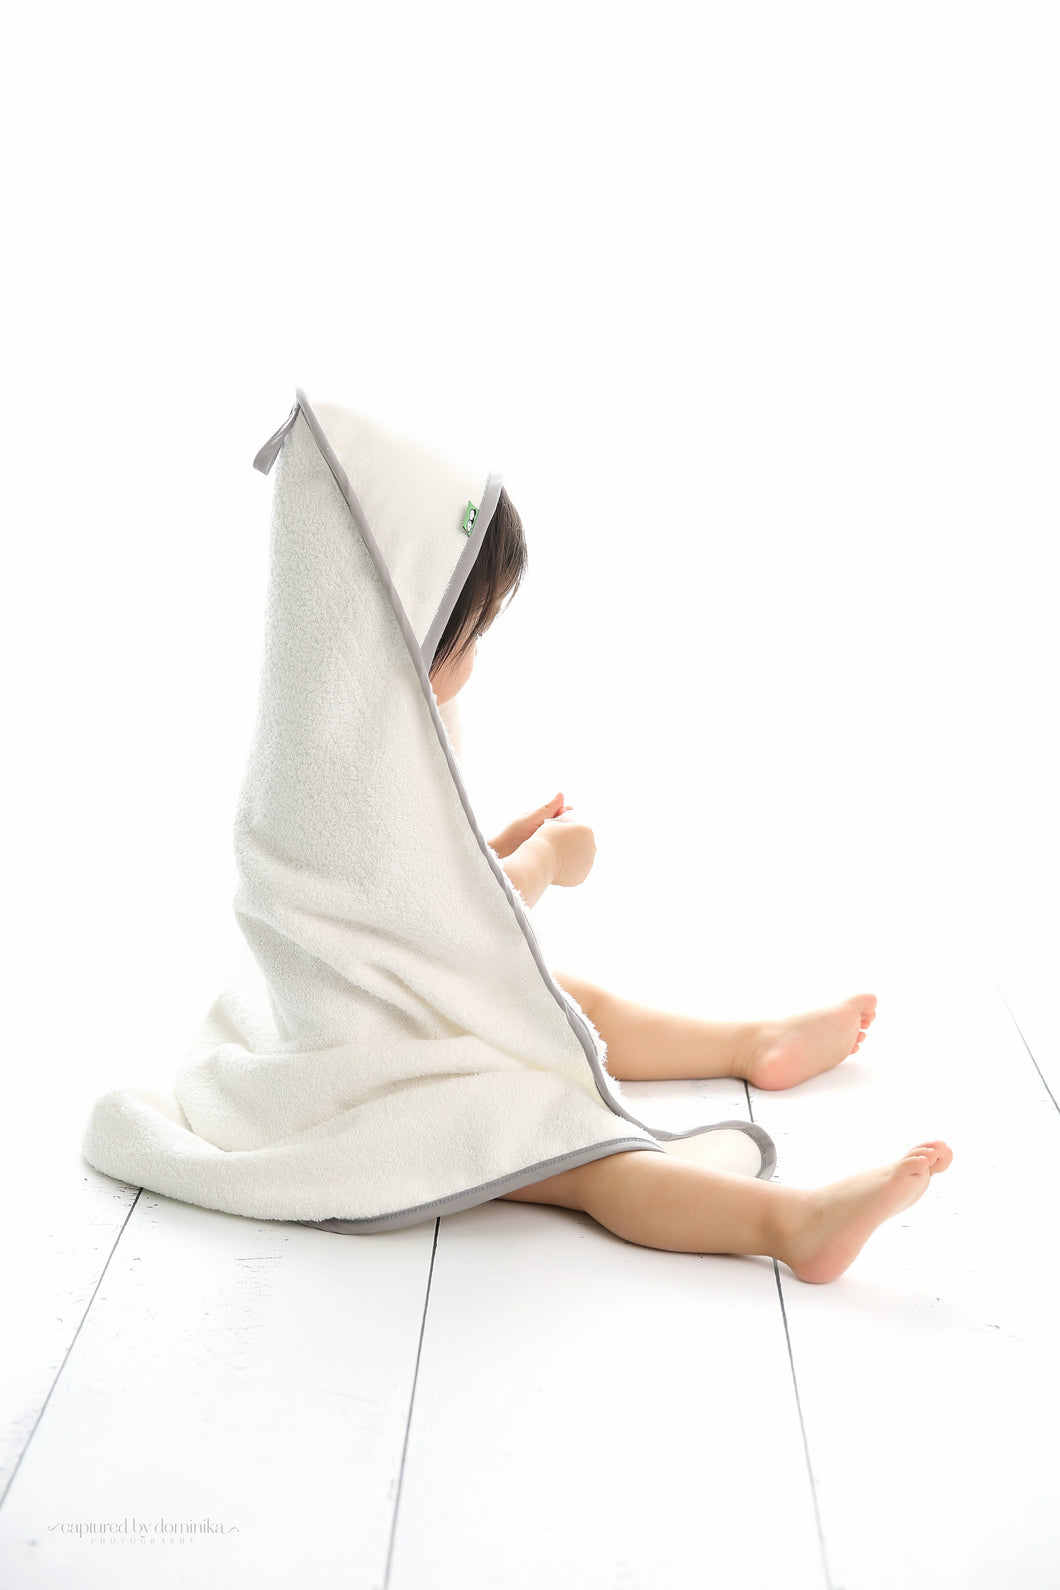 Imperfect Classic Hooded Towel